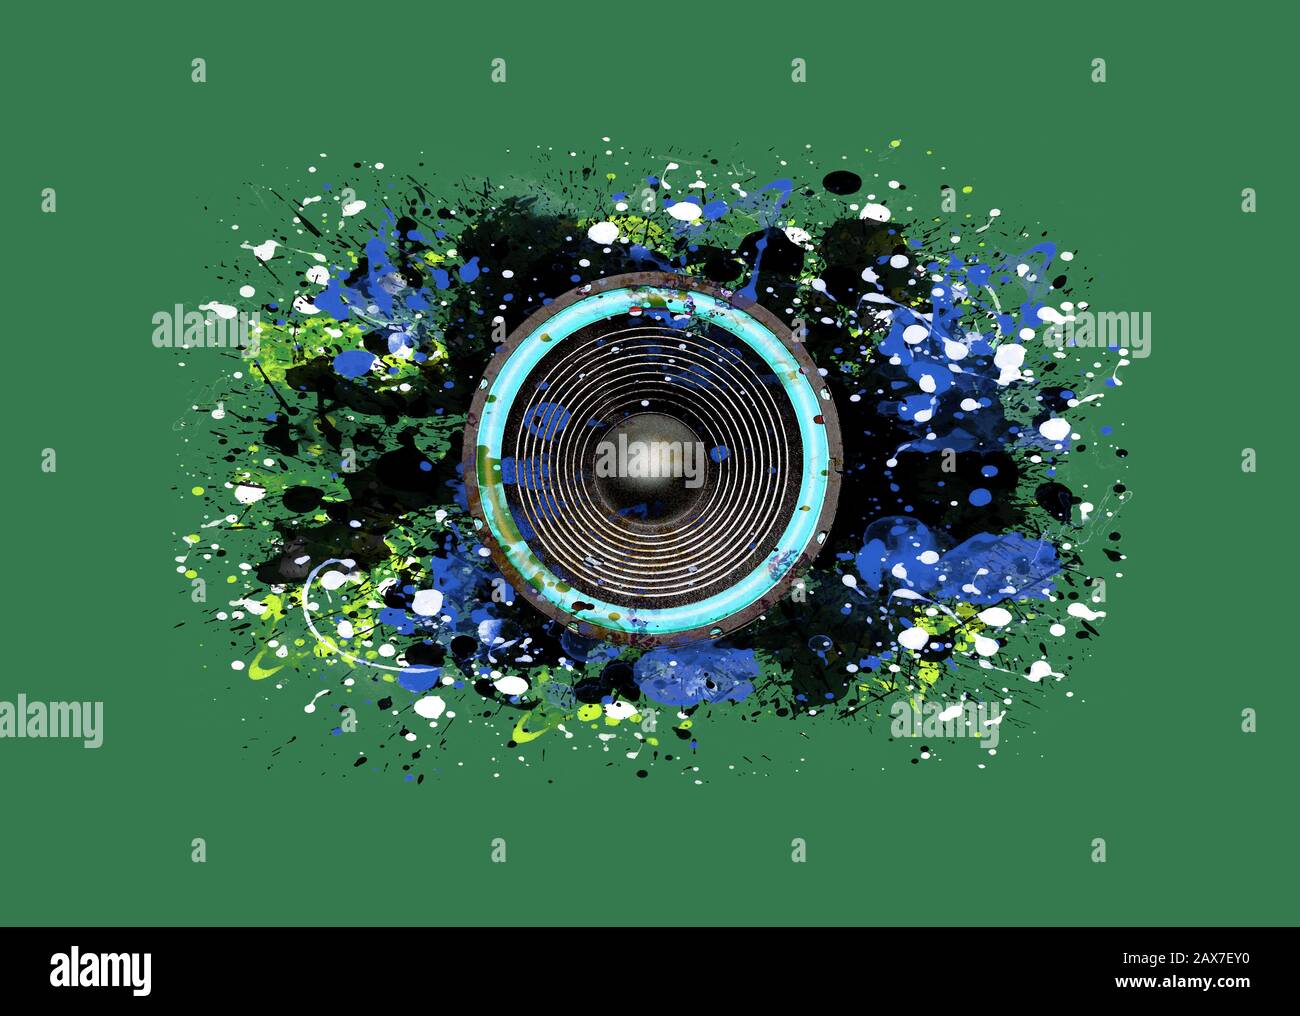 Blue music speaker and splattered paint on a green background Stock Photo